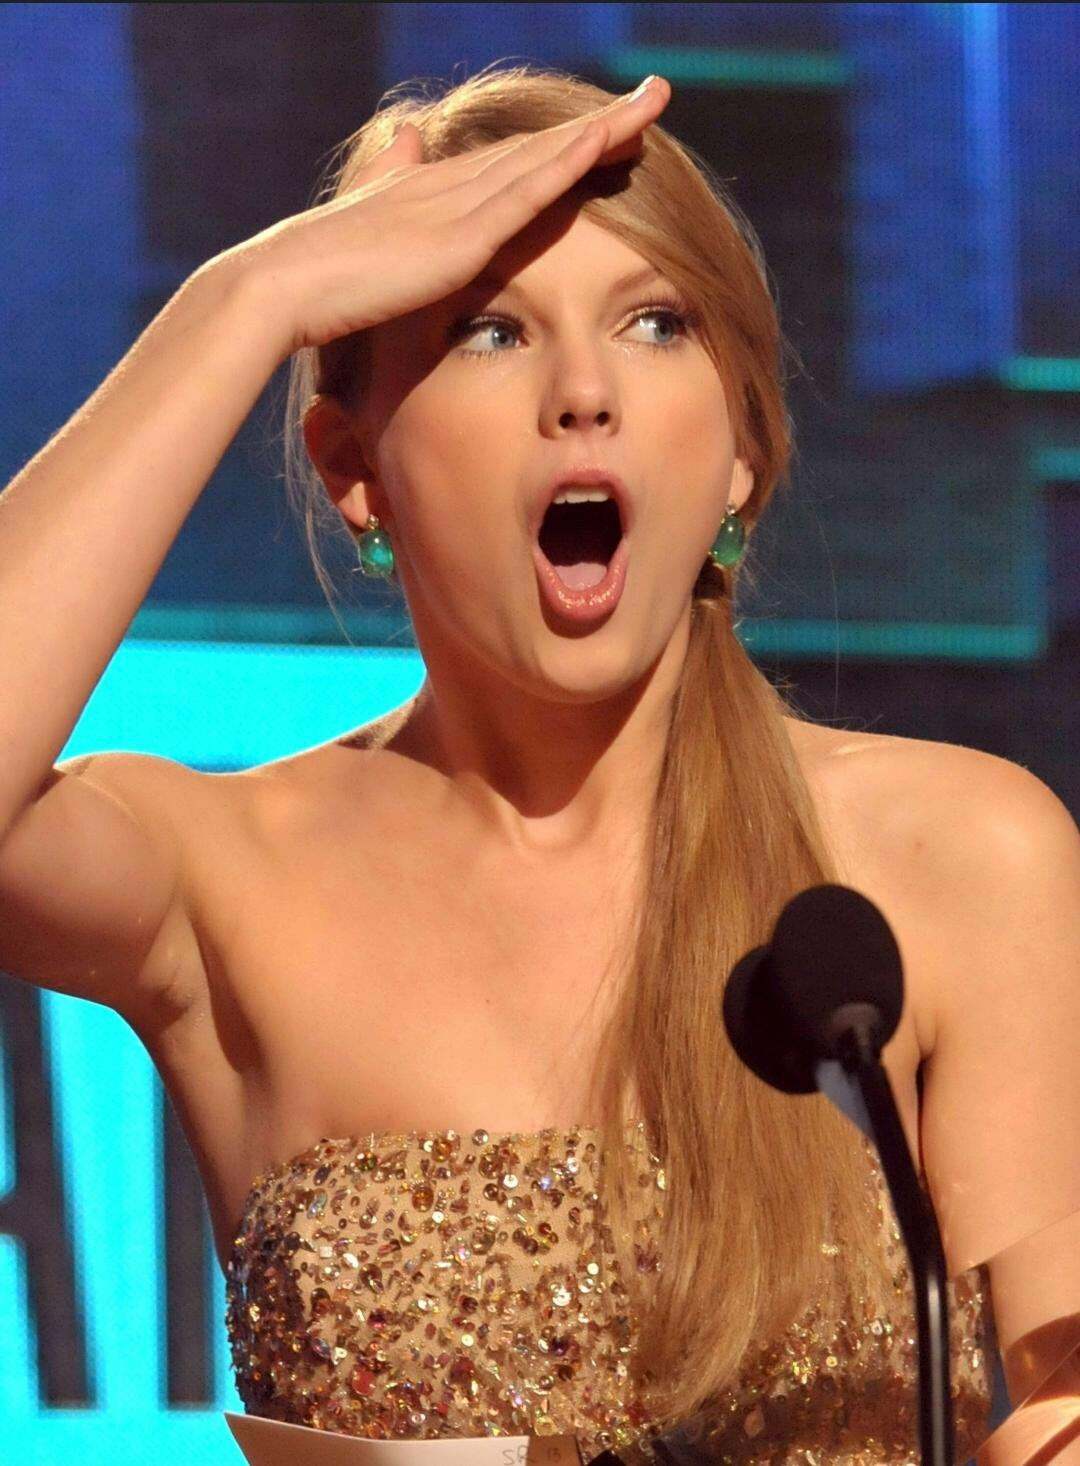 Taylor Swift opening wide